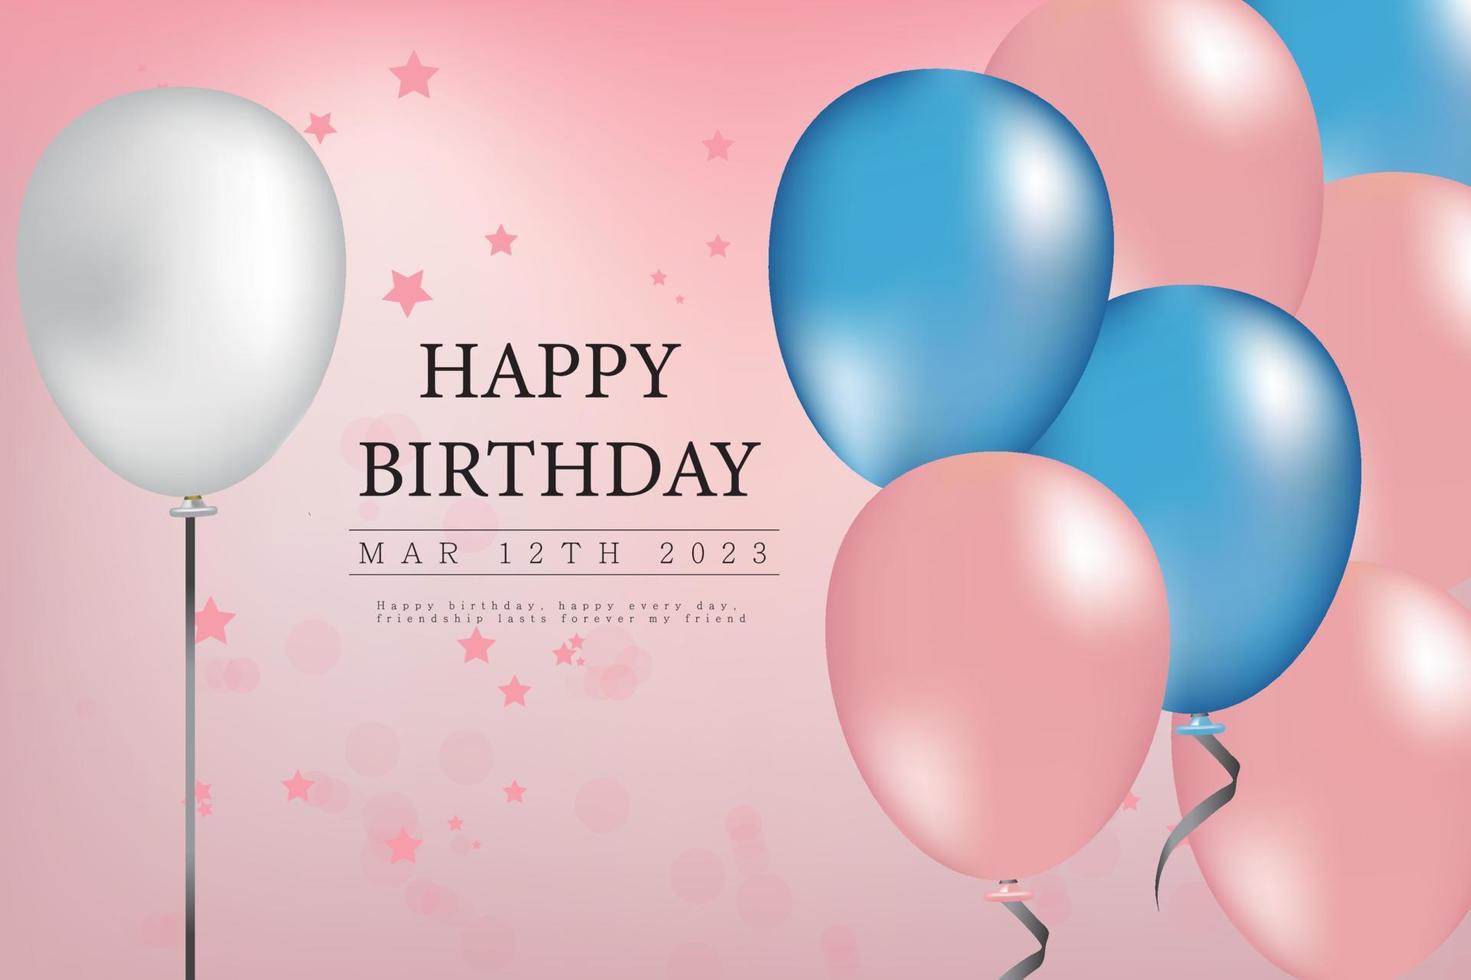 Happy birthday to you with luxury balloons and confetti black and white vector